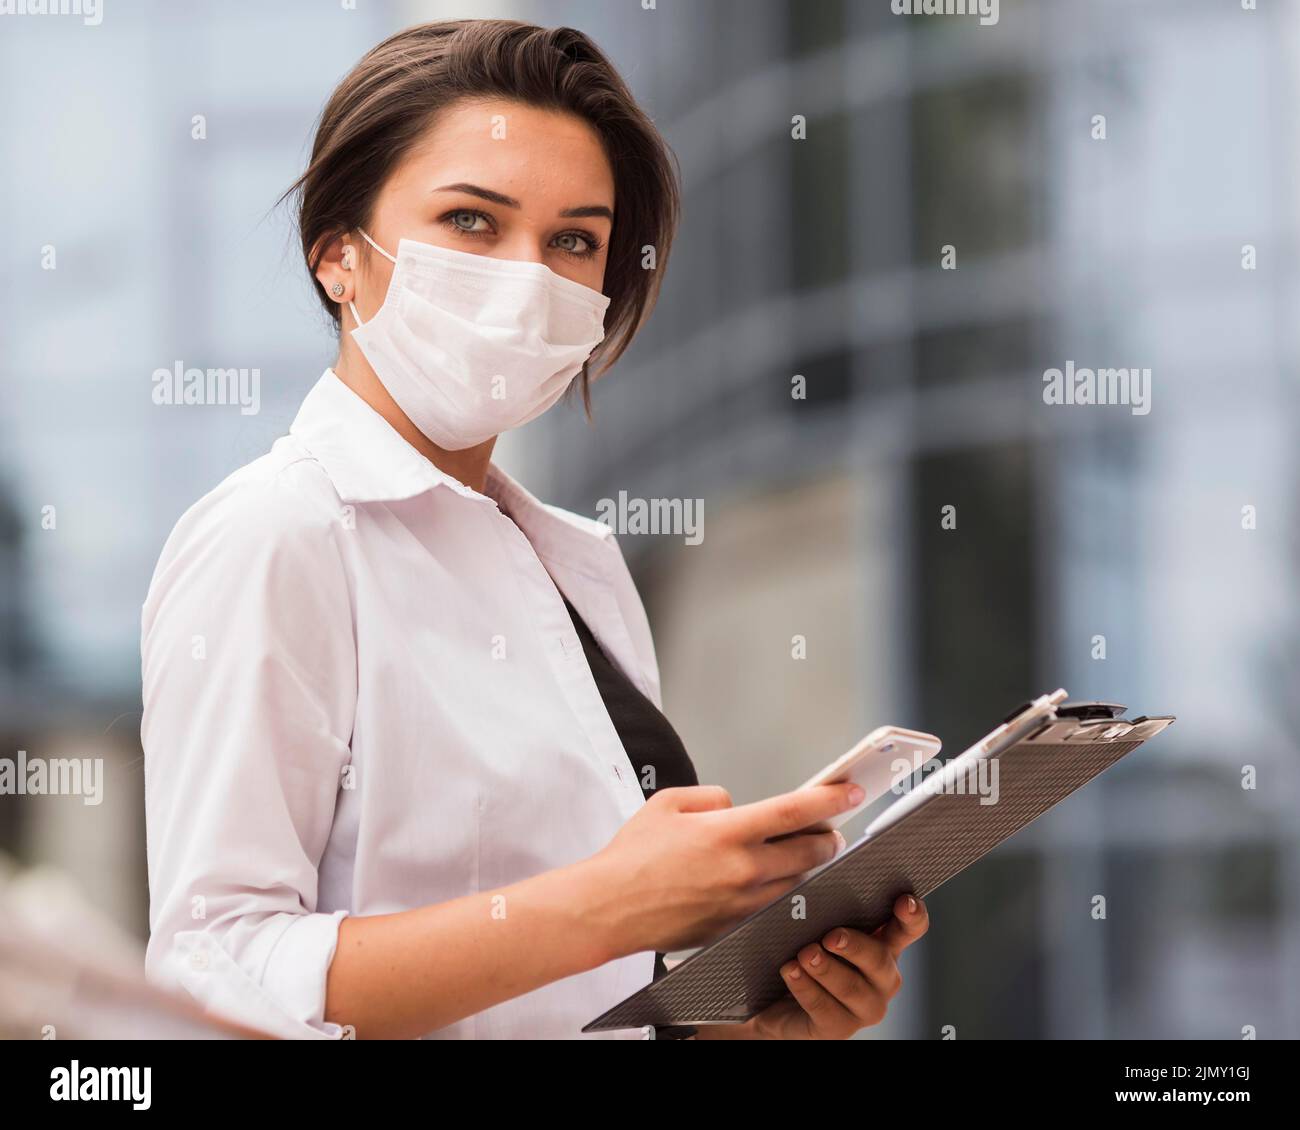 Side view woman working during pandemic with smartphone notepad Stock Photo